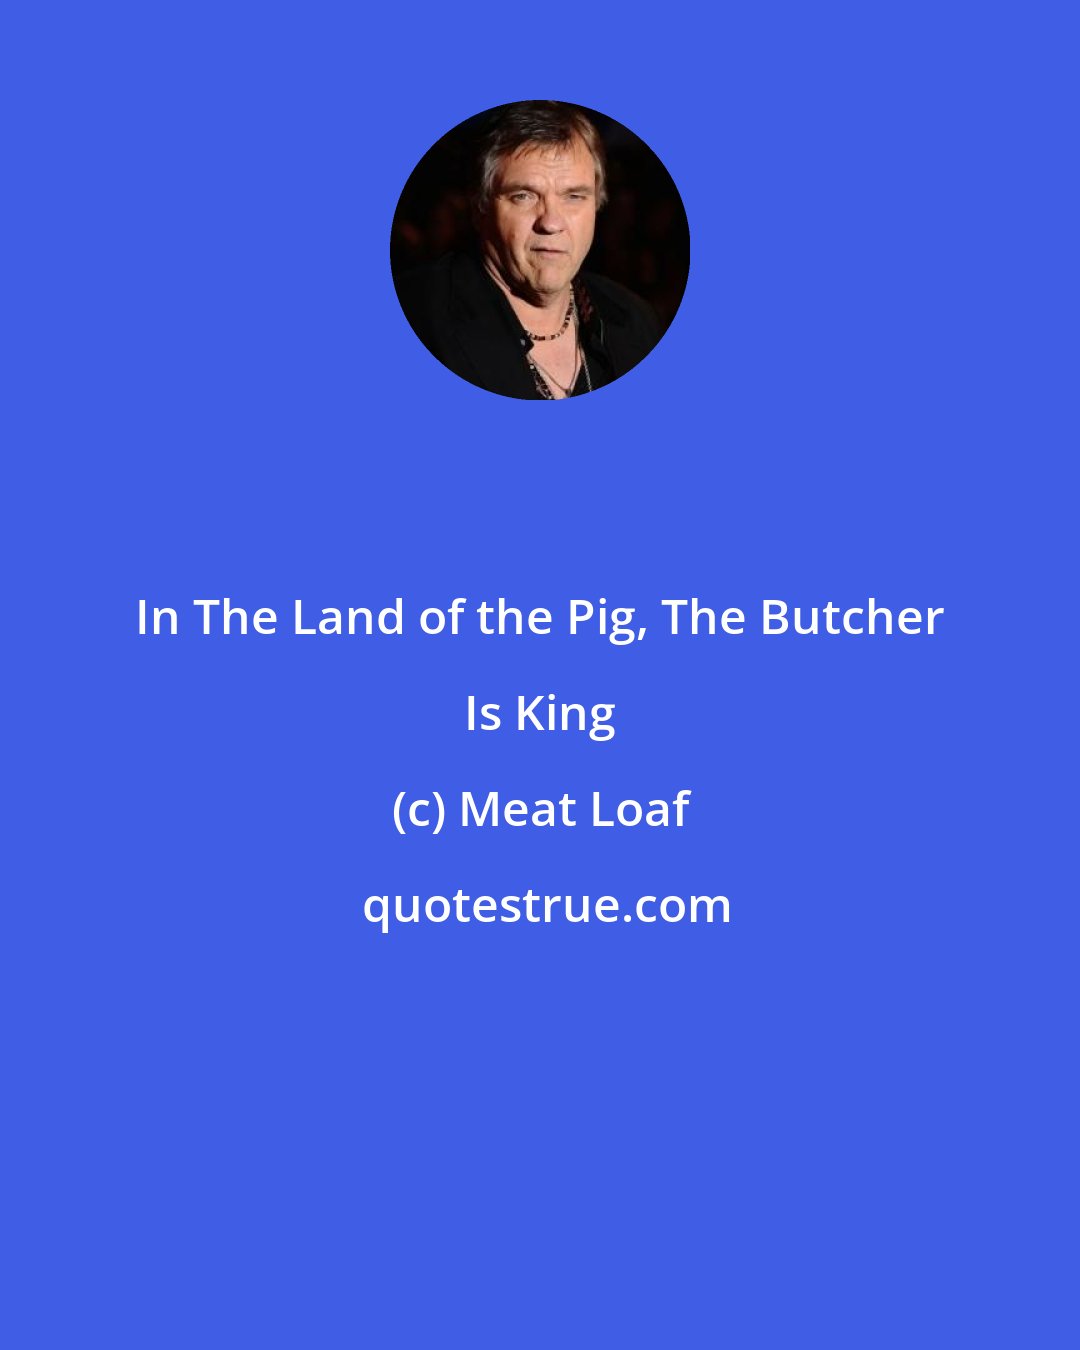 Meat Loaf: In The Land of the Pig, The Butcher Is King